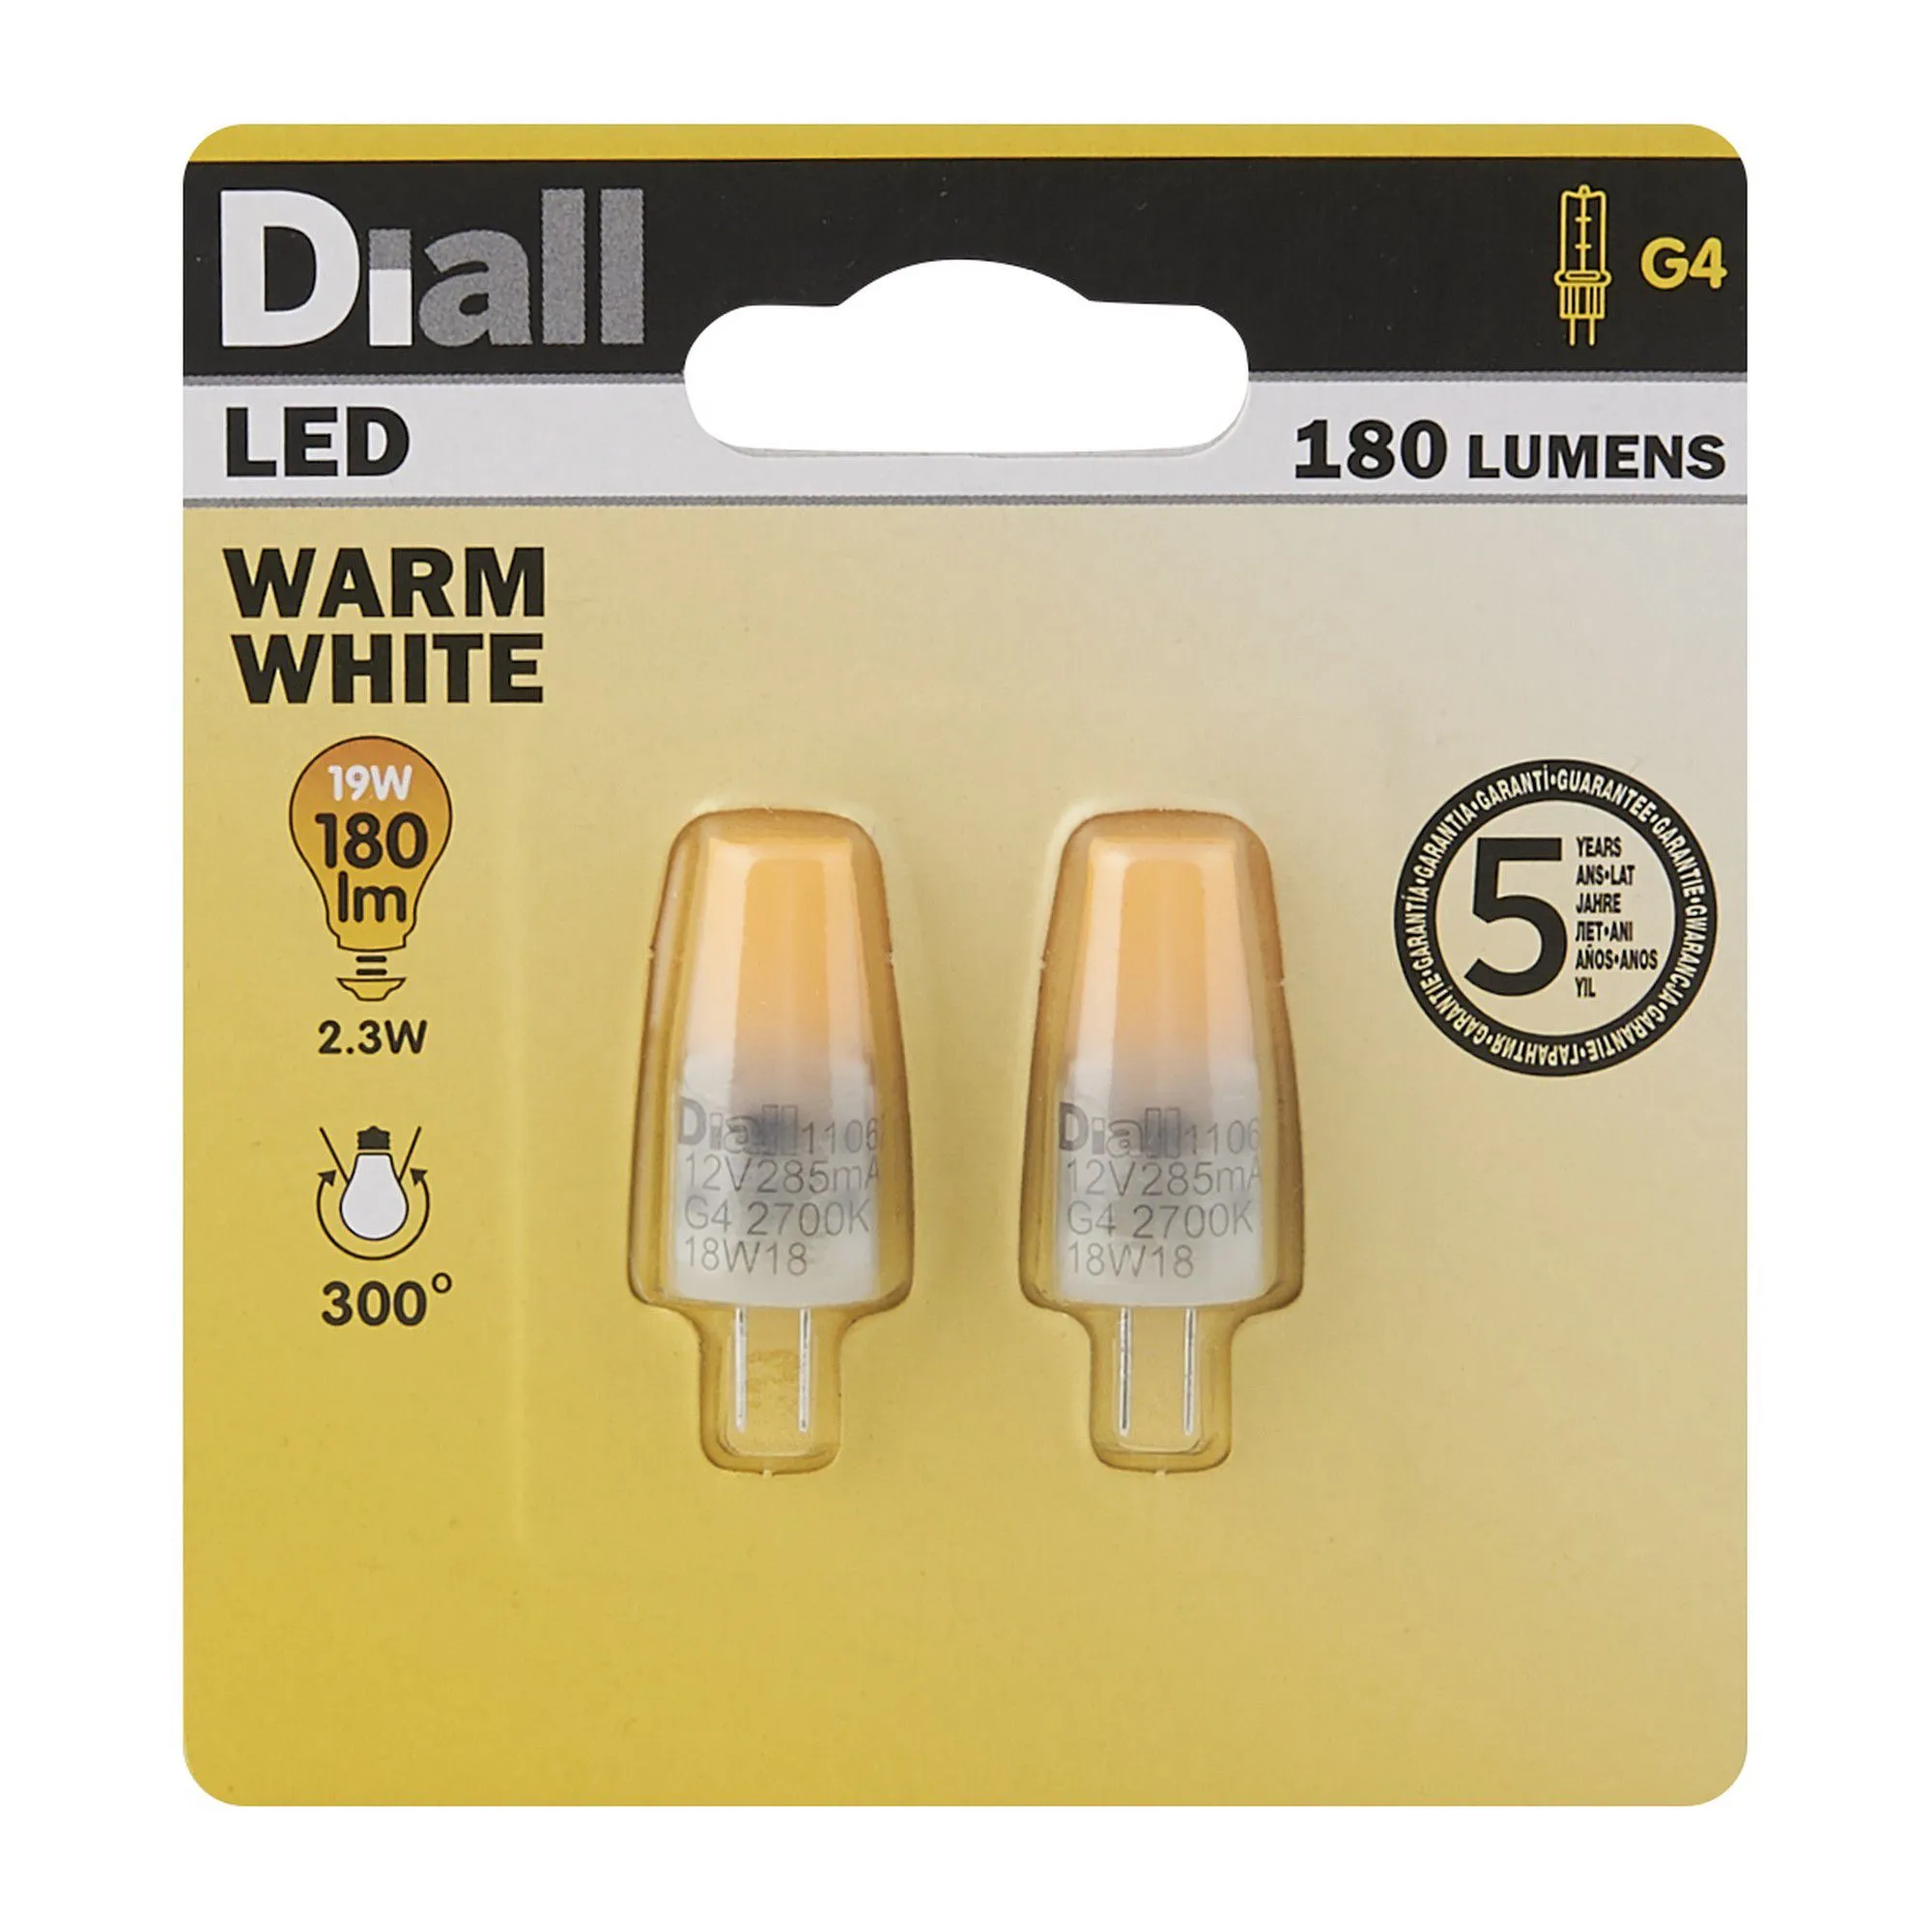 Diall G4 2W Warm white Non-dimmable Light bulb, Pack of 2